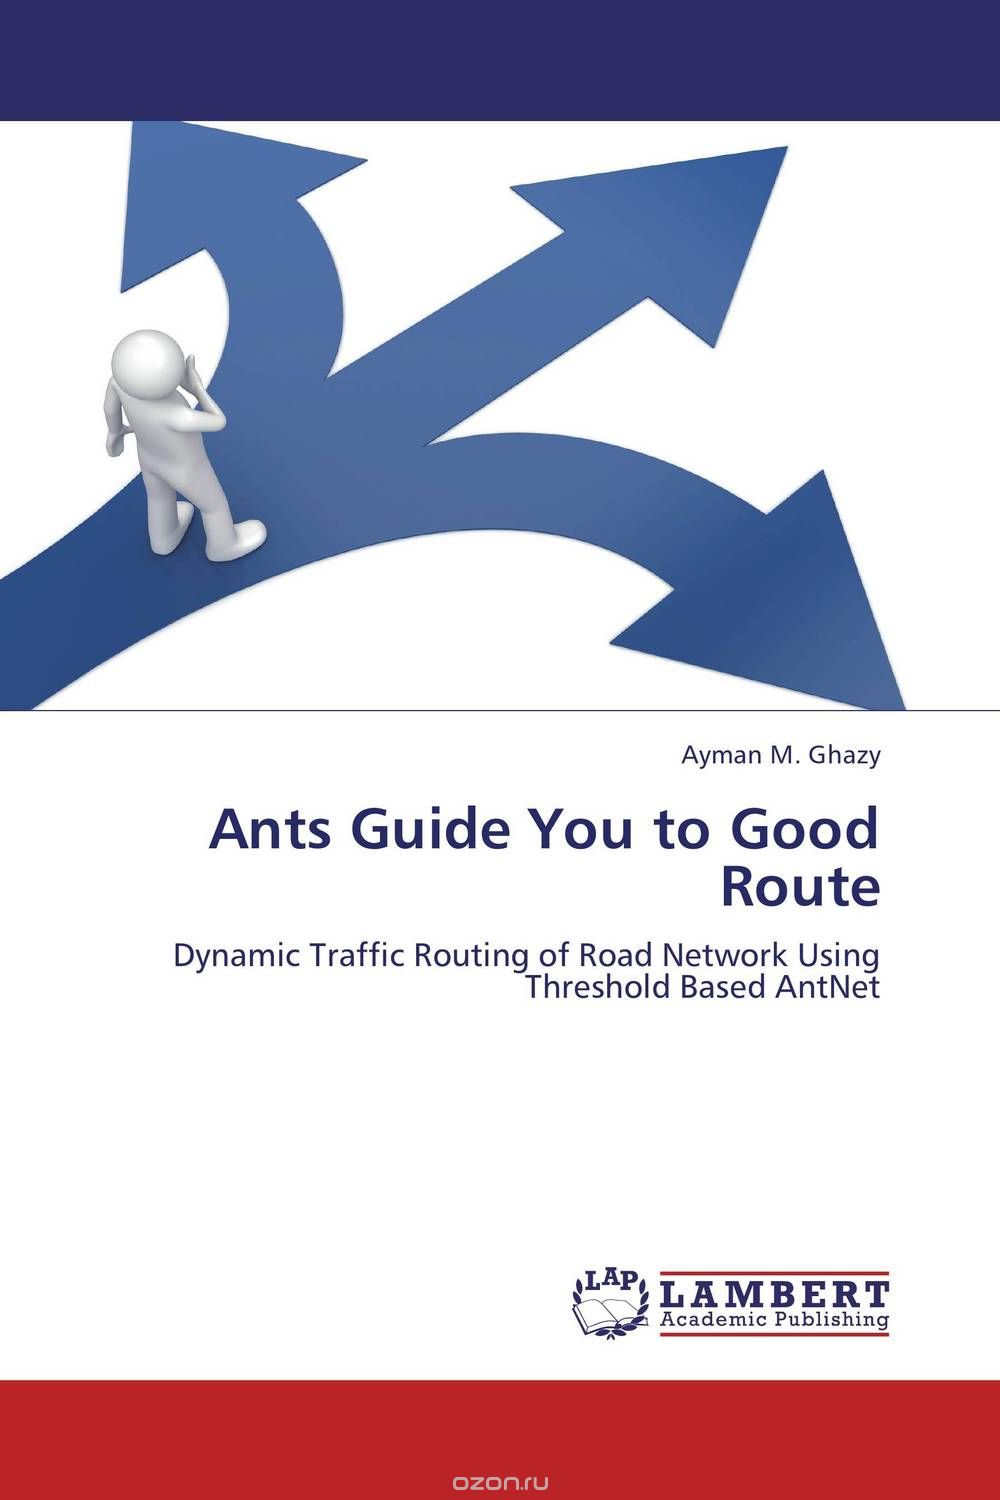 Ants Guide You to Good Route